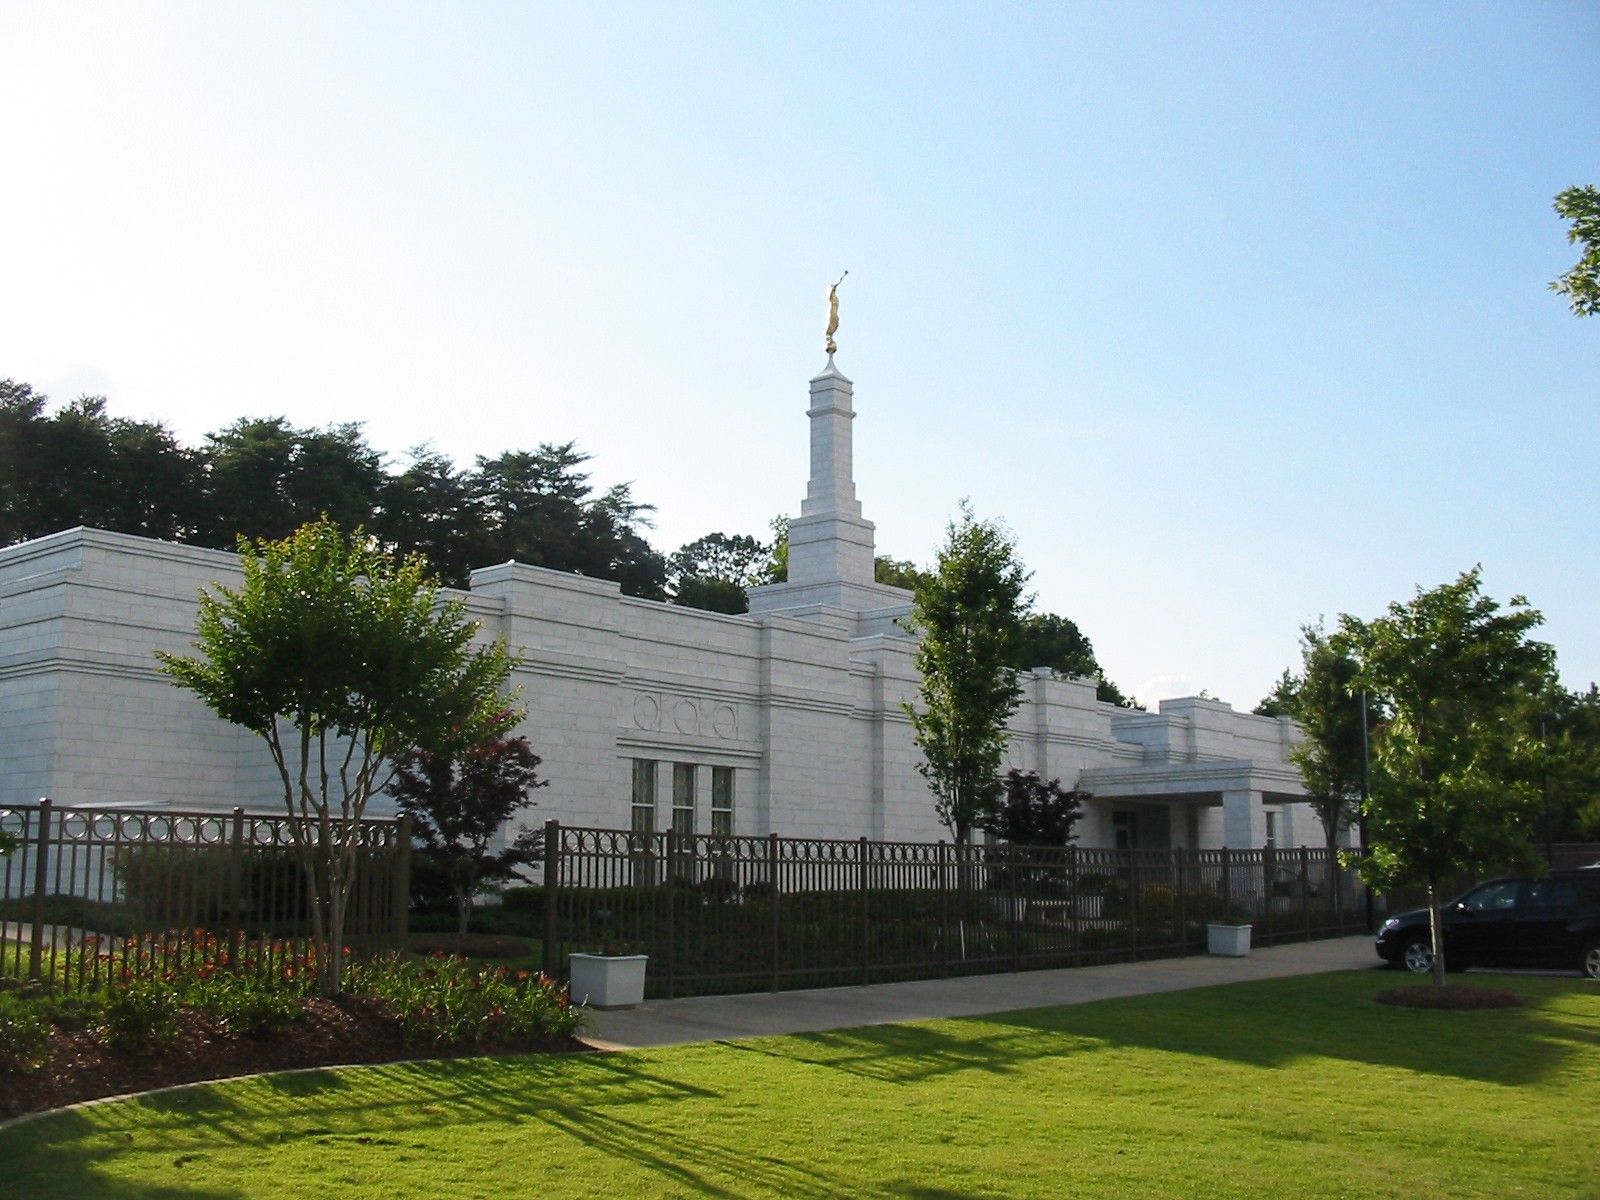 An exterior view of the Birmingham Alabama Temple and grounds.